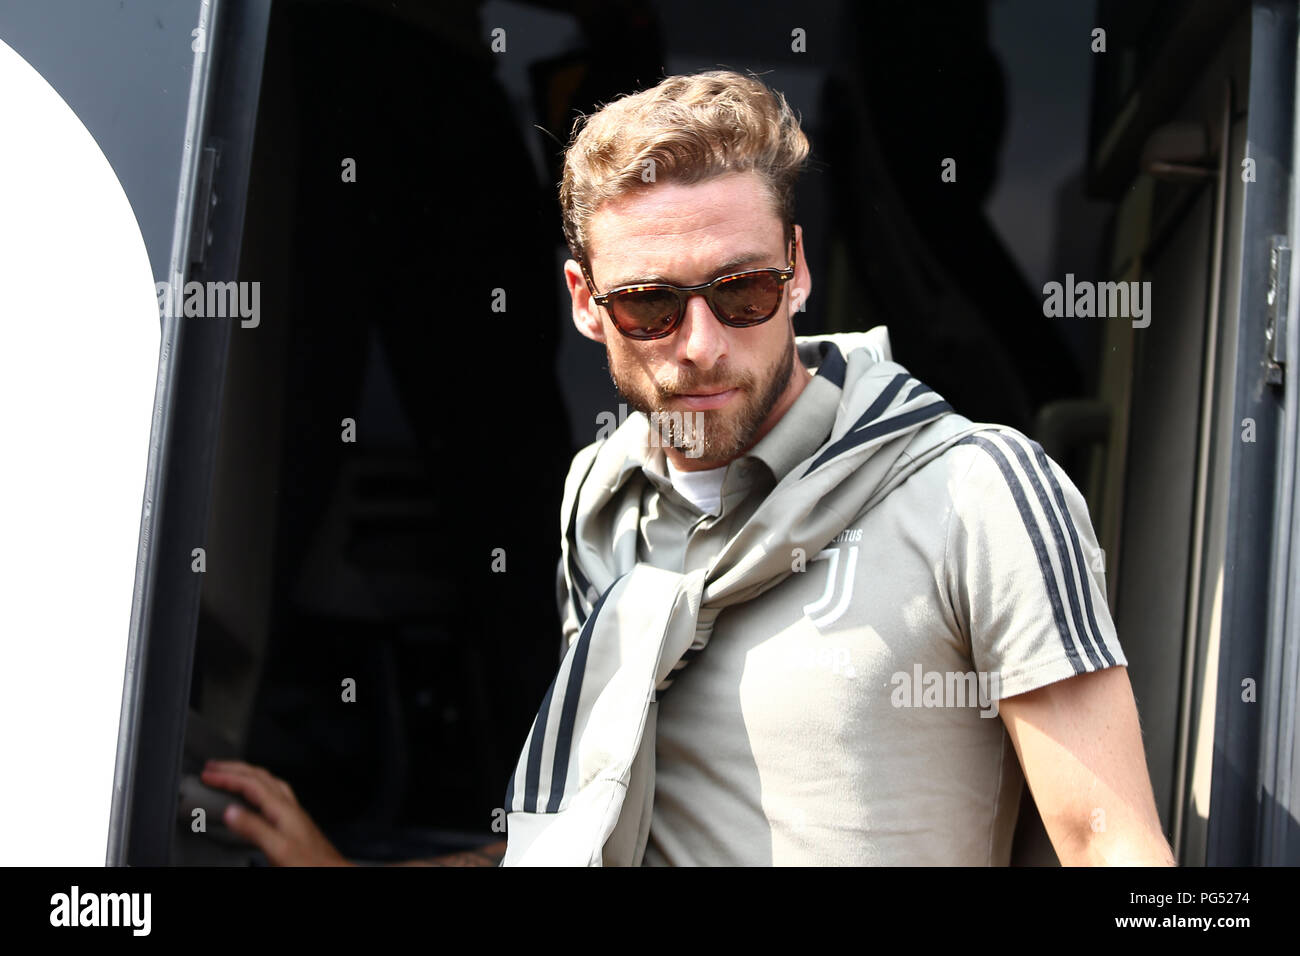 Claudio Marchisio of Juventus FC looks on before the pre-season friendly match between Juventus A and Juventus B. Stock Photo